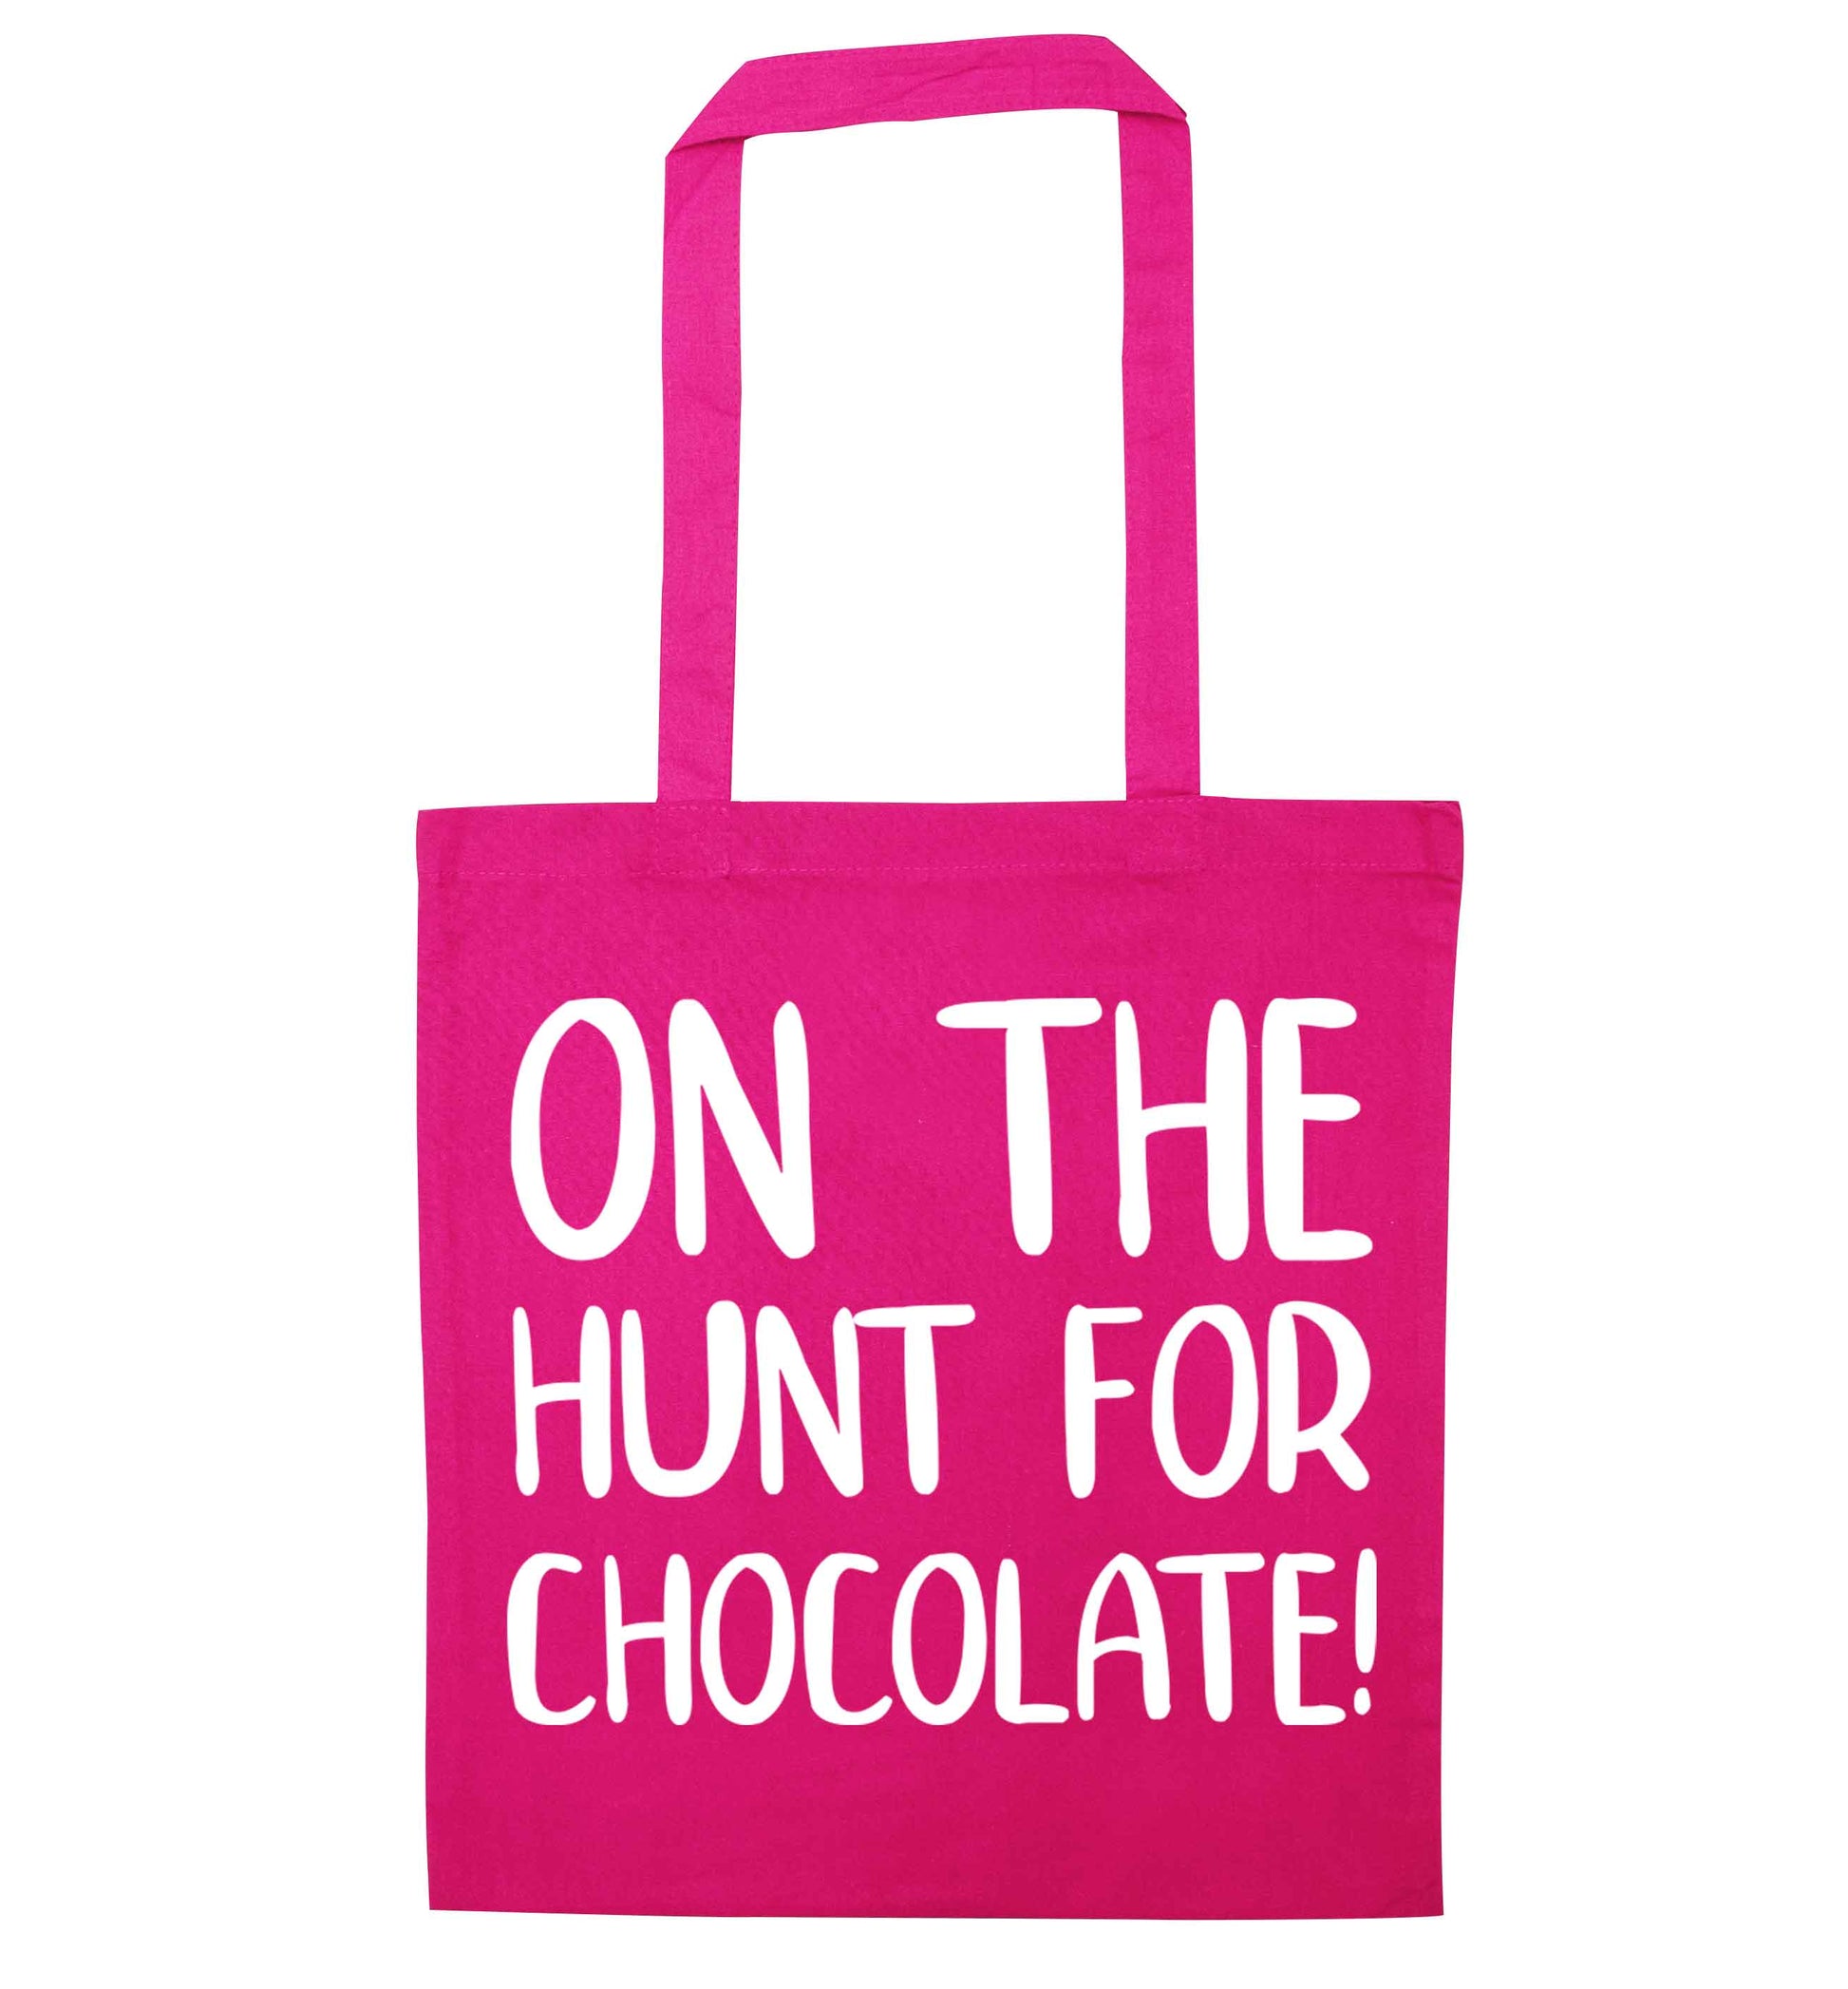 On the hunt for chocolate! pink tote bag